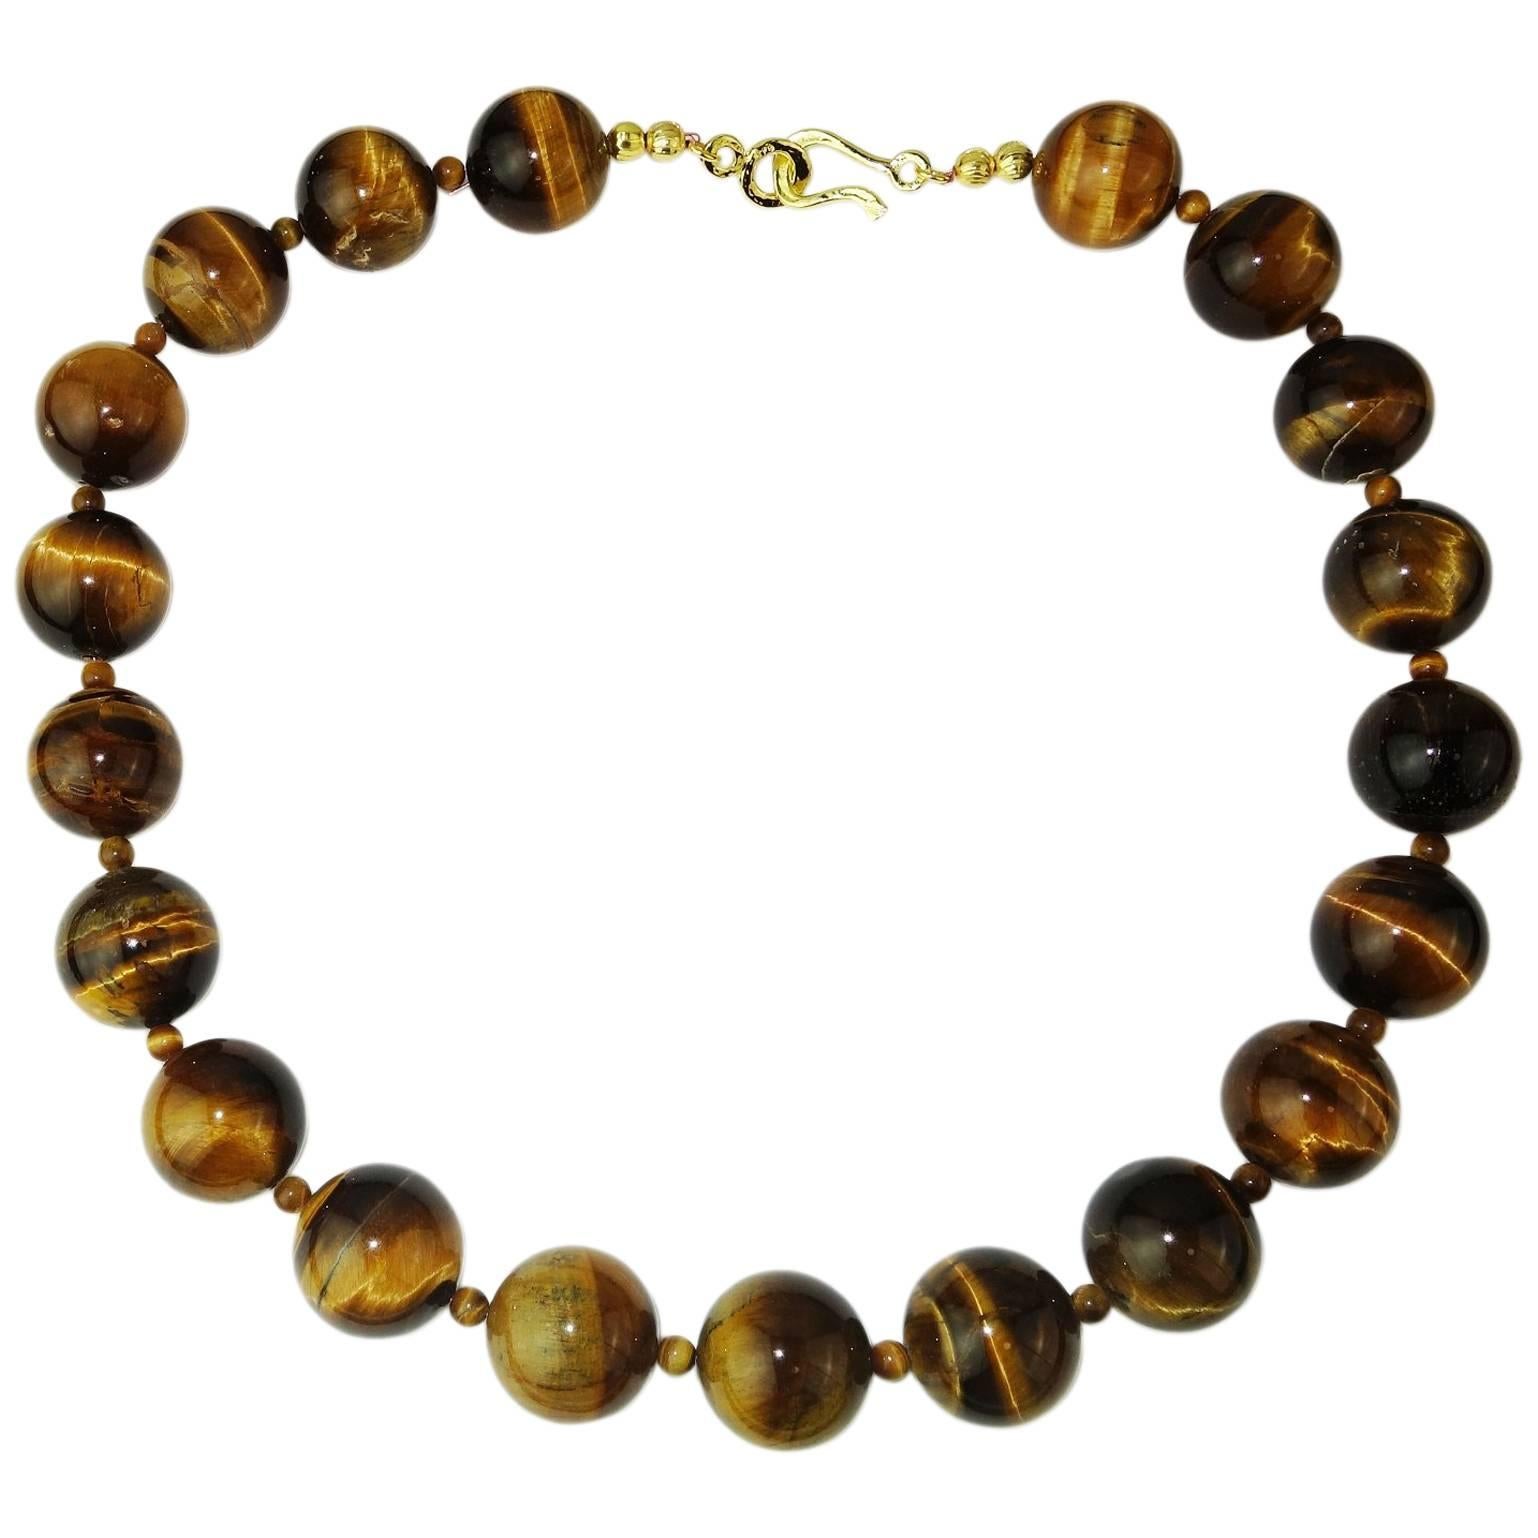 Gemjunky Glowing Highly Polished Tiger’s Eye Necklace with 18K Yellow Gold Clasp